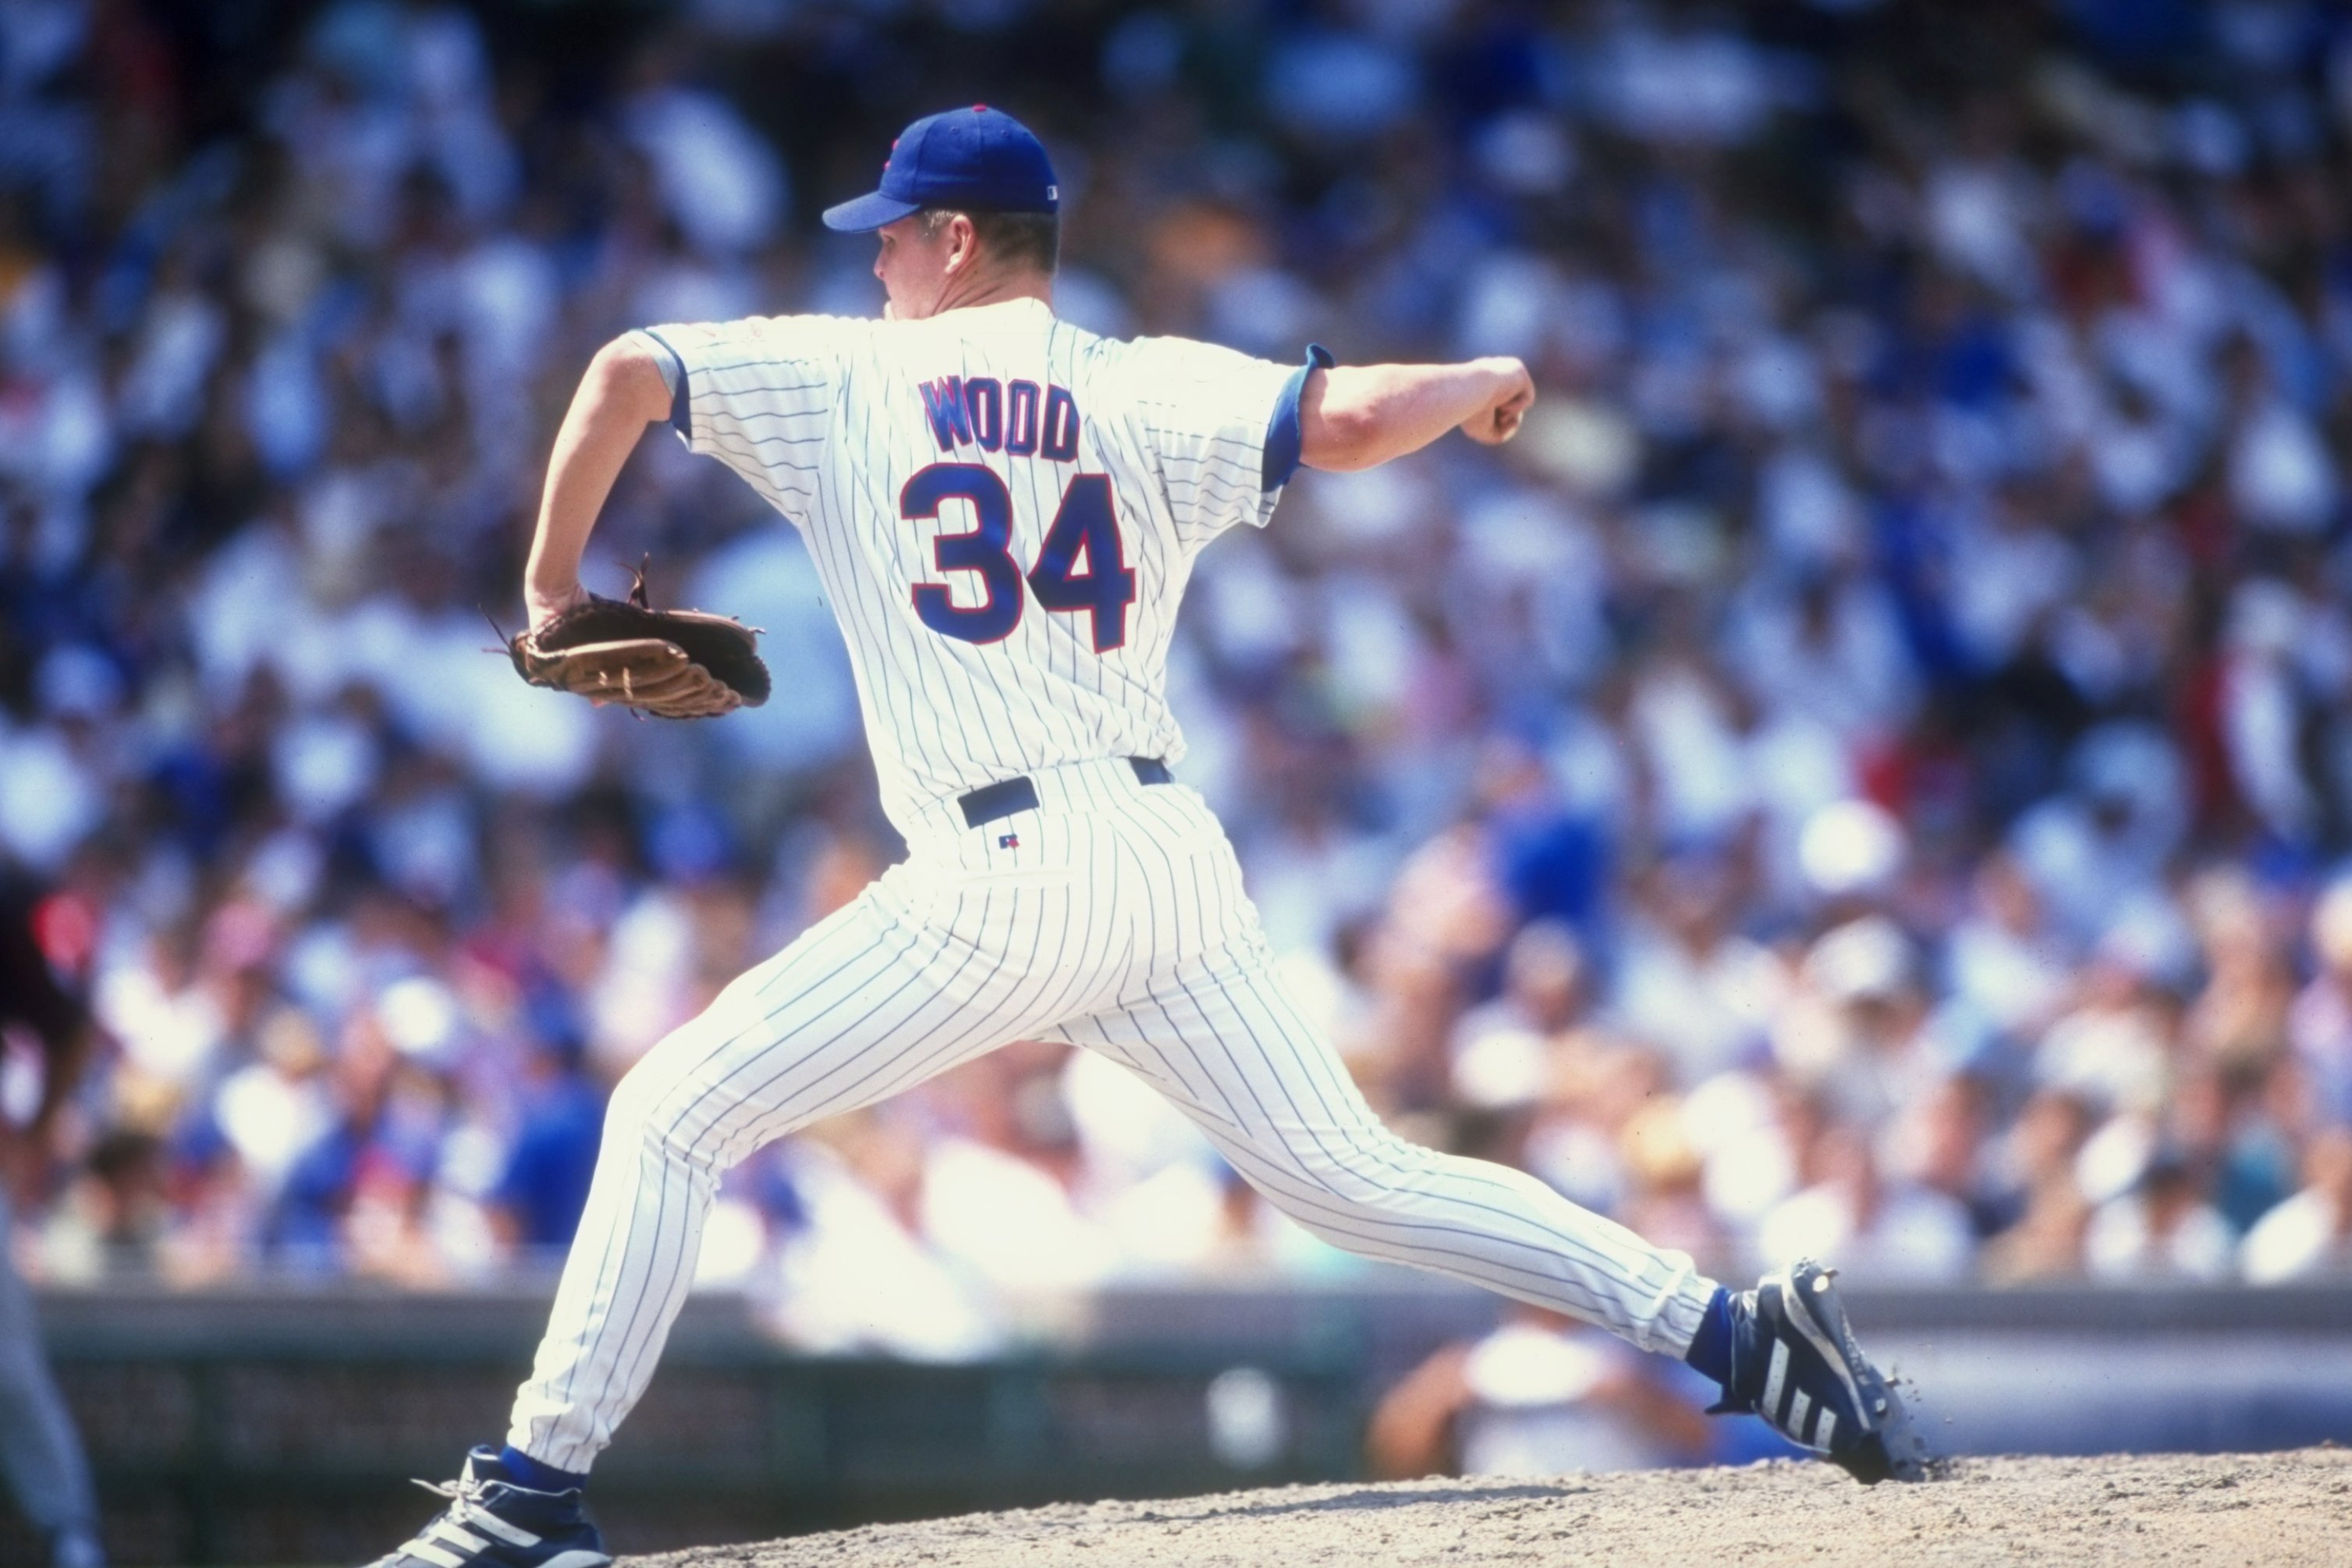 Kerry Wood on most surreal moment: 20 strikeouts or HR in Game 7